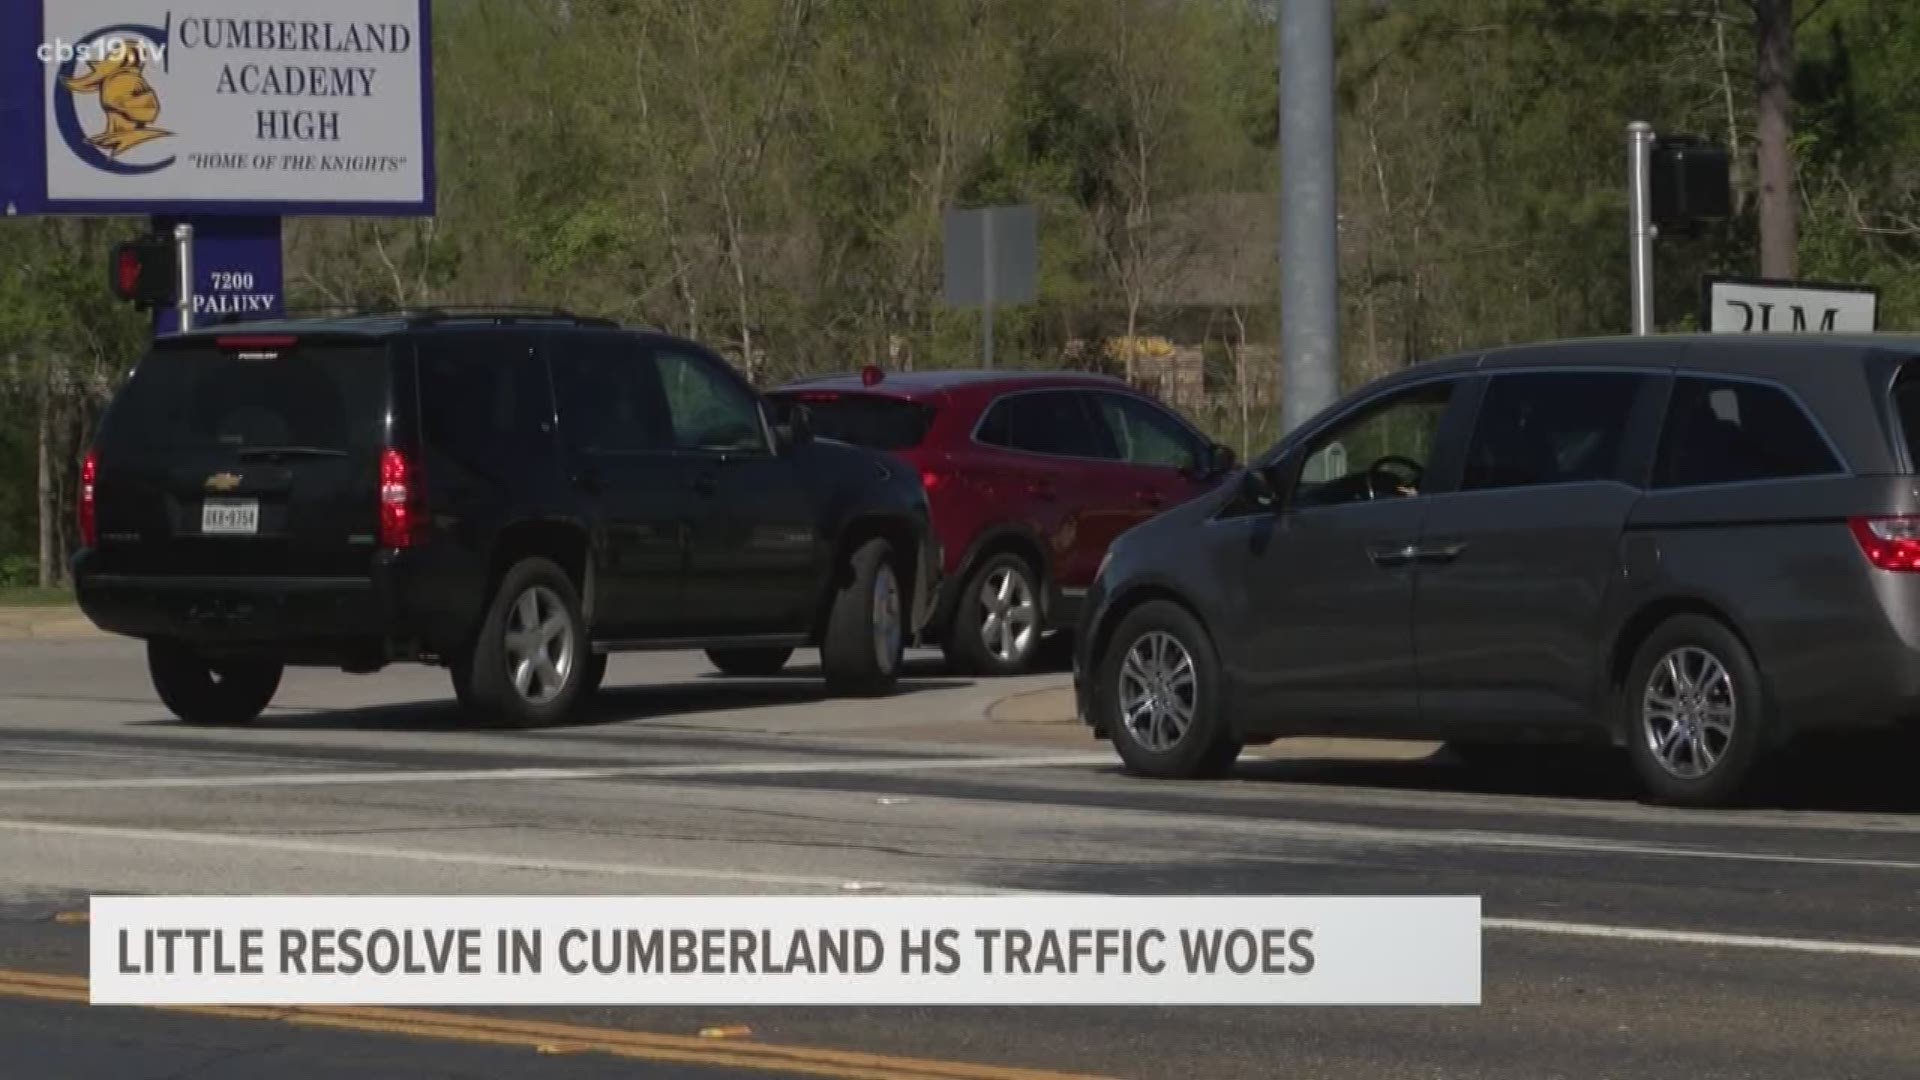 It's been one week since school started at the high school, and nearby neighbors say the issues with traffic congestion and rude drivers continues to grow.